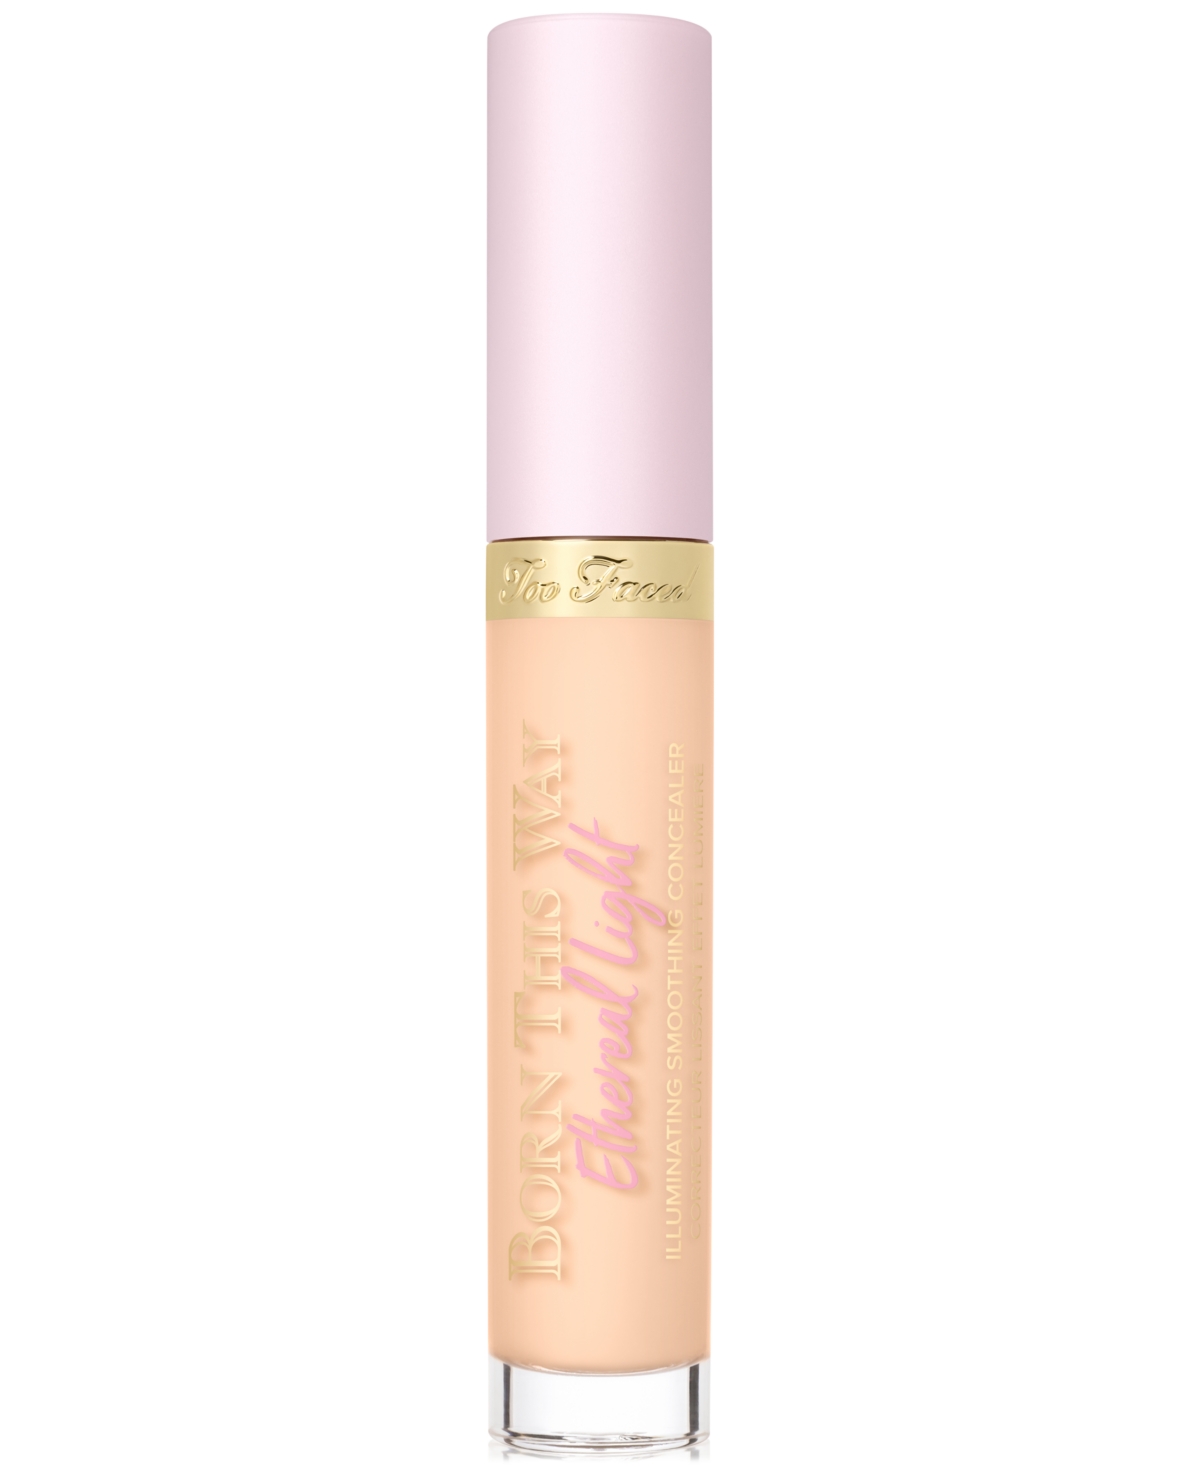 Too Faced Born This Way Ethereal Light Illuminating Smoothing Concealer In Graham Cracker - Light With Golden Under